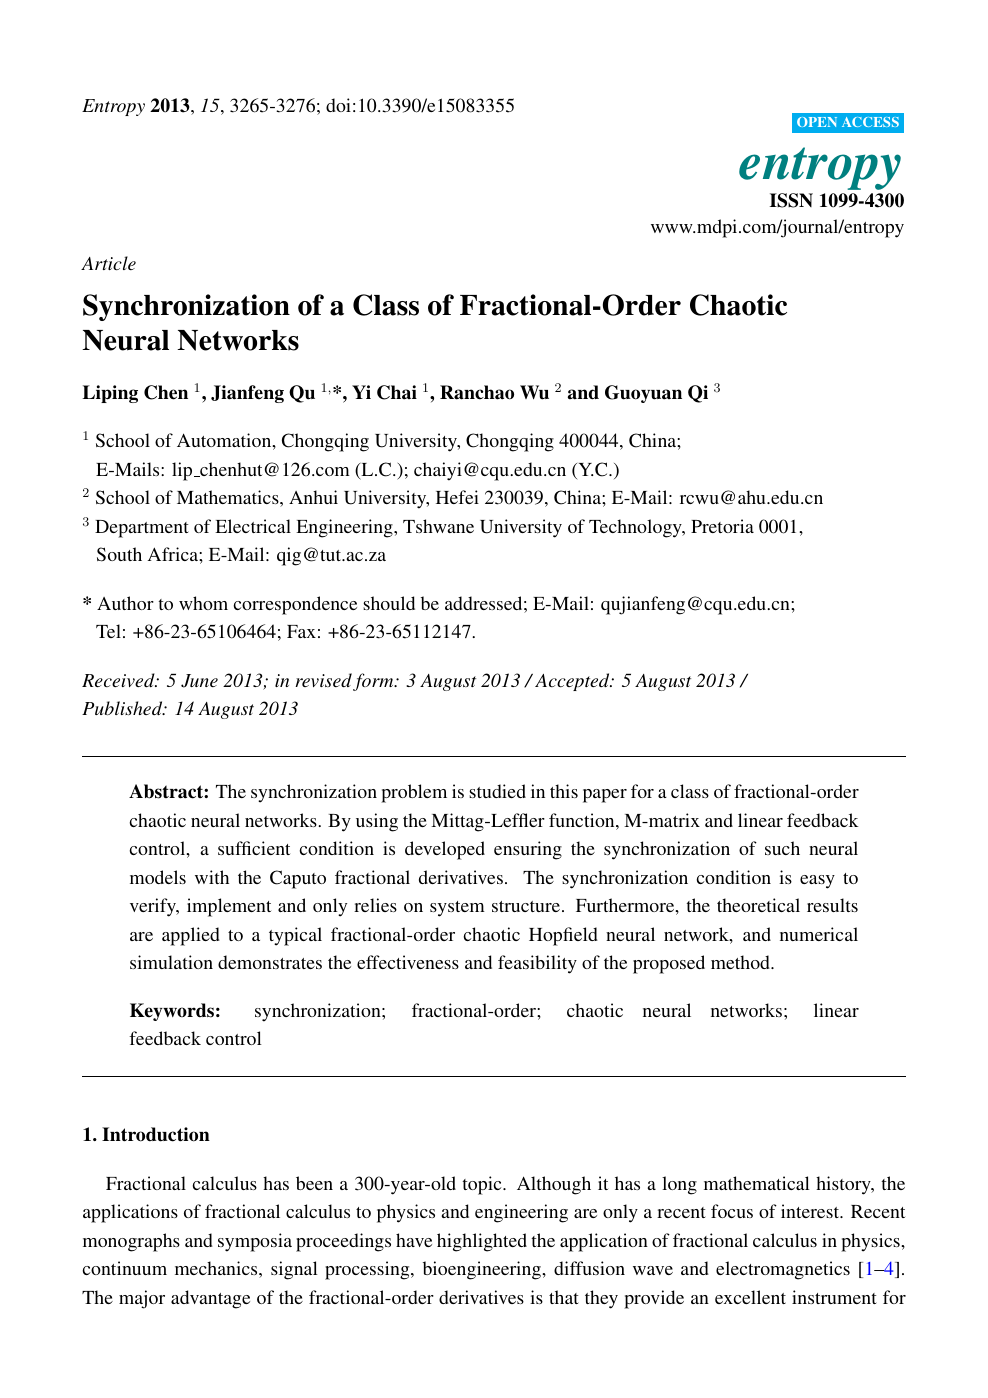 Synchronization Of A Class Of Fractional Order Chaotic Neural Networks Topic Of Research Paper In Mathematics Download Scholarly Article Pdf And Read For Free On Cyberleninka Open Science Hub